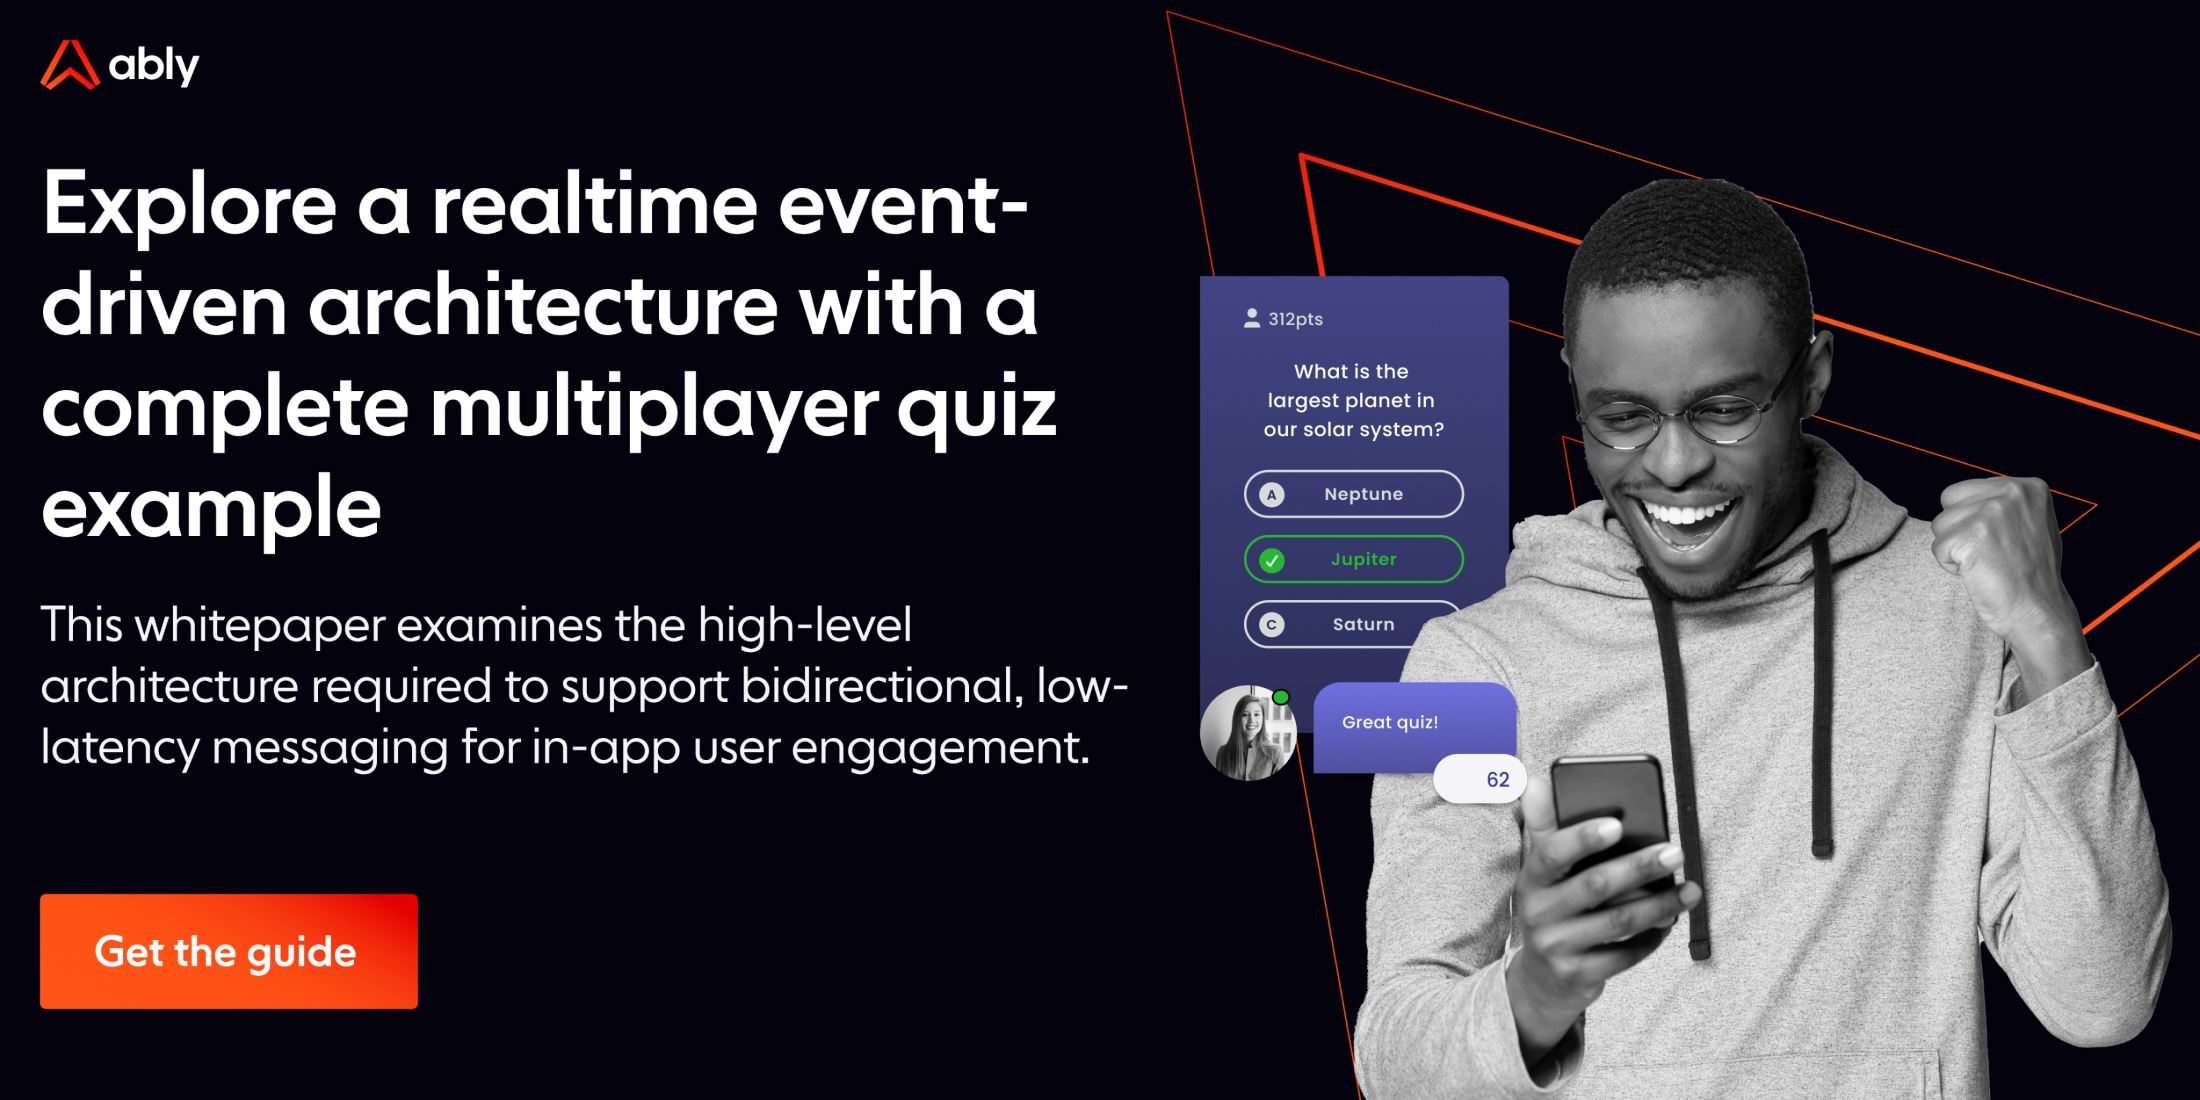 Explore a realtime event-driven architecture with a complete multiplayer quiz example image